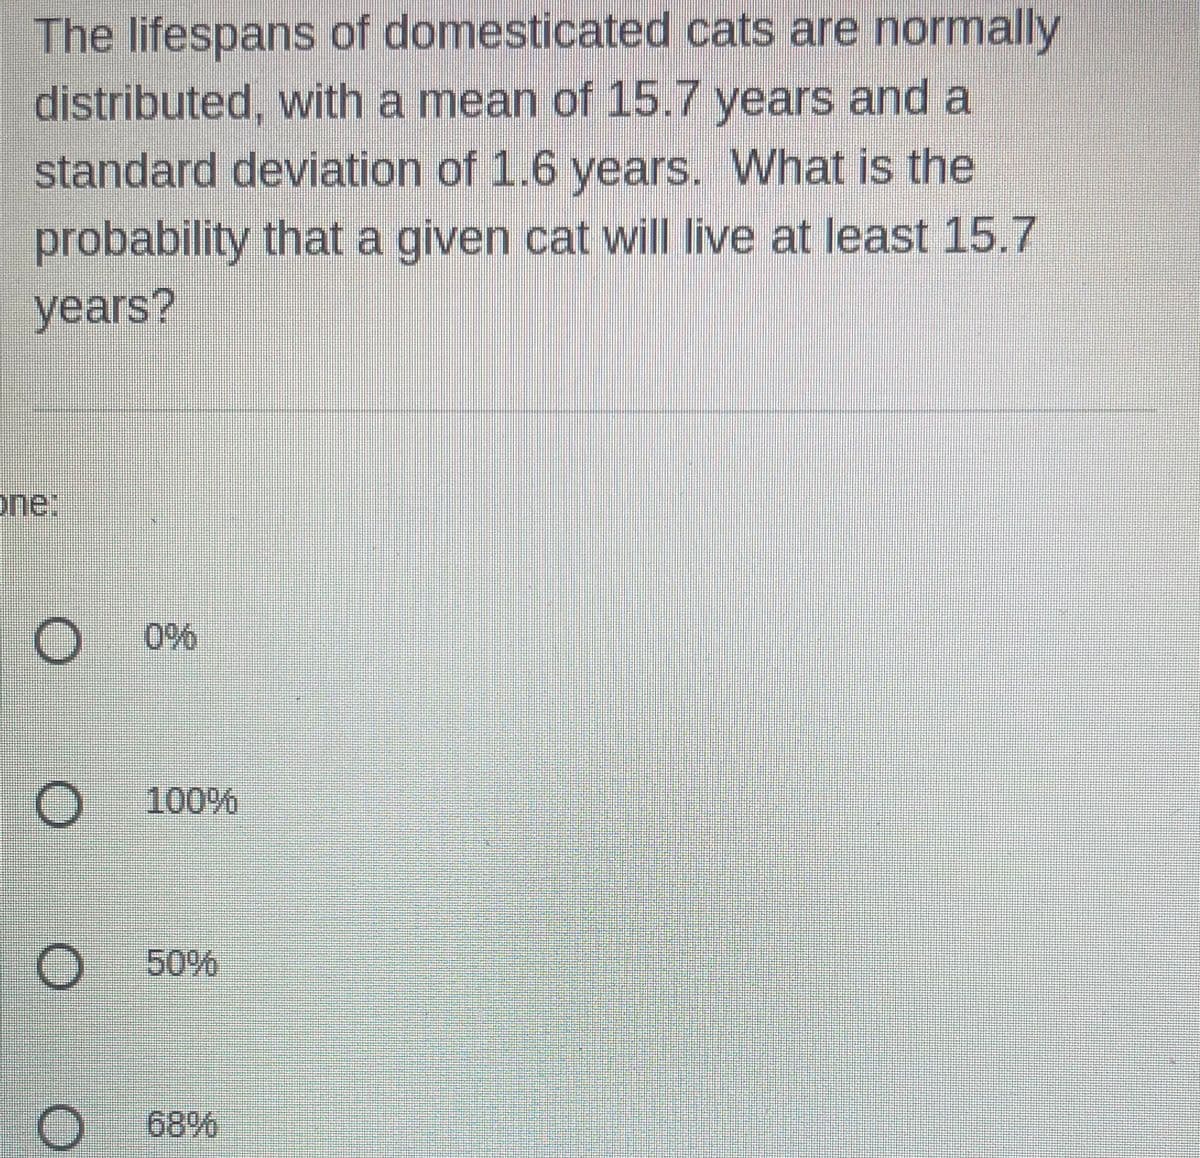 The lifespans of domesticated cats are normally
distributed, with a mean of 15.7 years and a
standard deviation of 1.6 years. What is the
probability that a given cat will live at least 15.7
years?
one:
O
O
O
100%
50%
68%